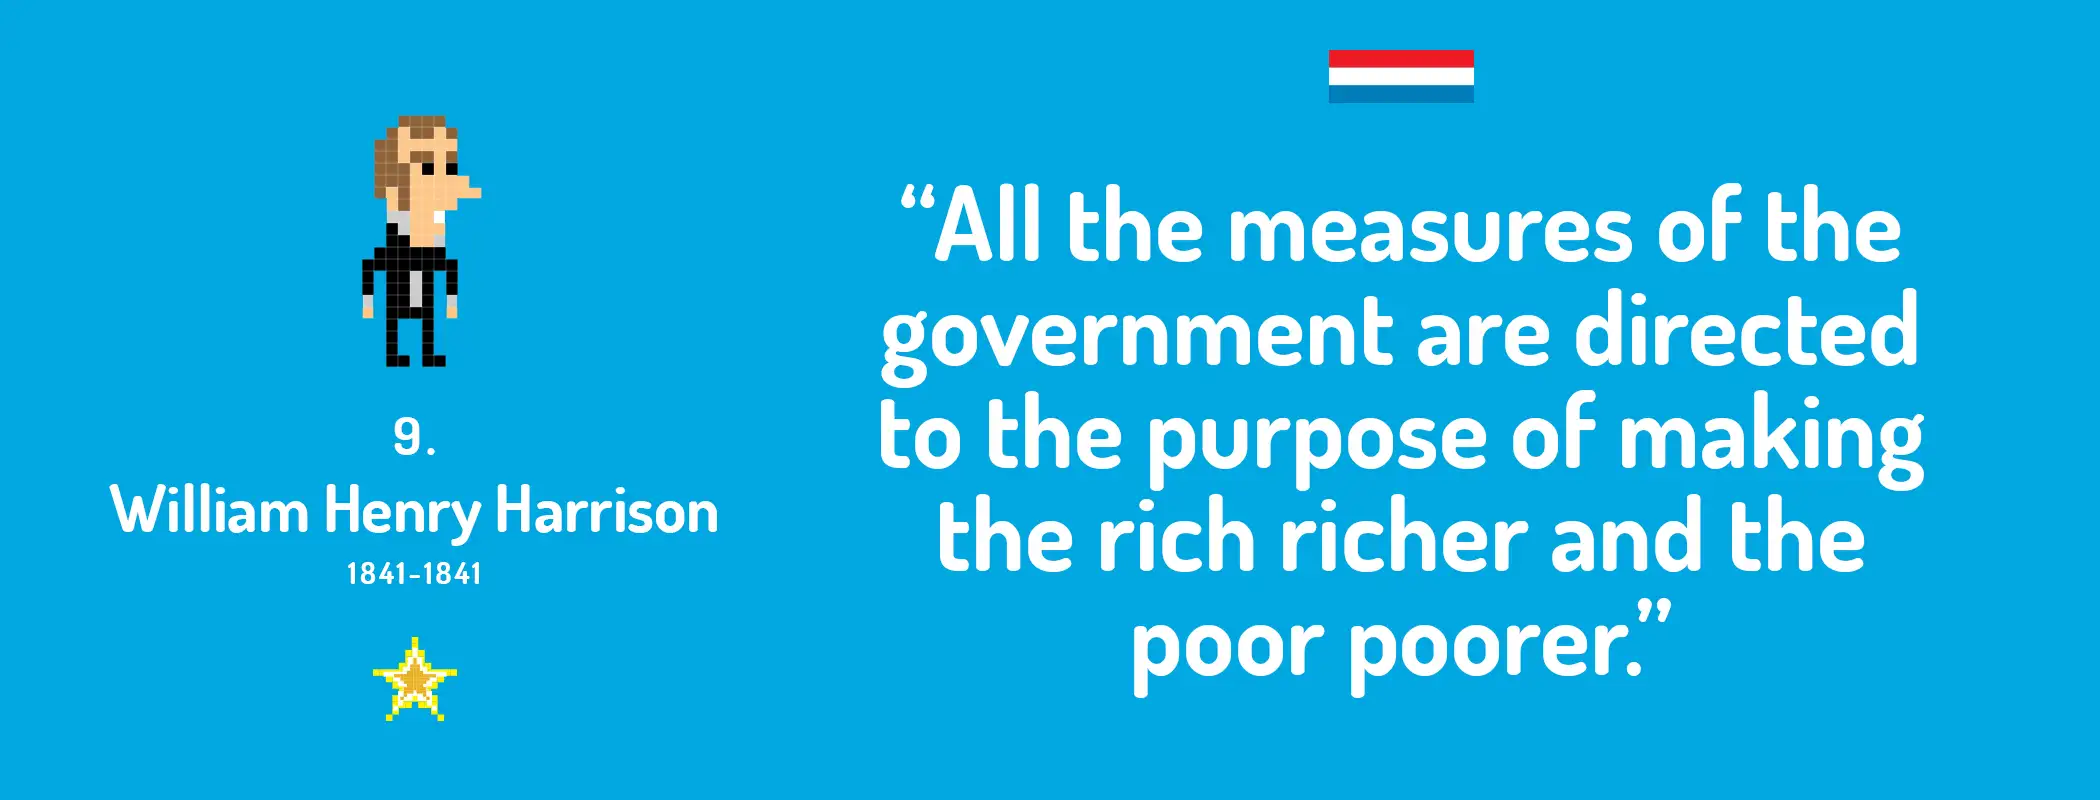 All the measures of the government are directed to the purpose of making the rich richer and the poor poorer.